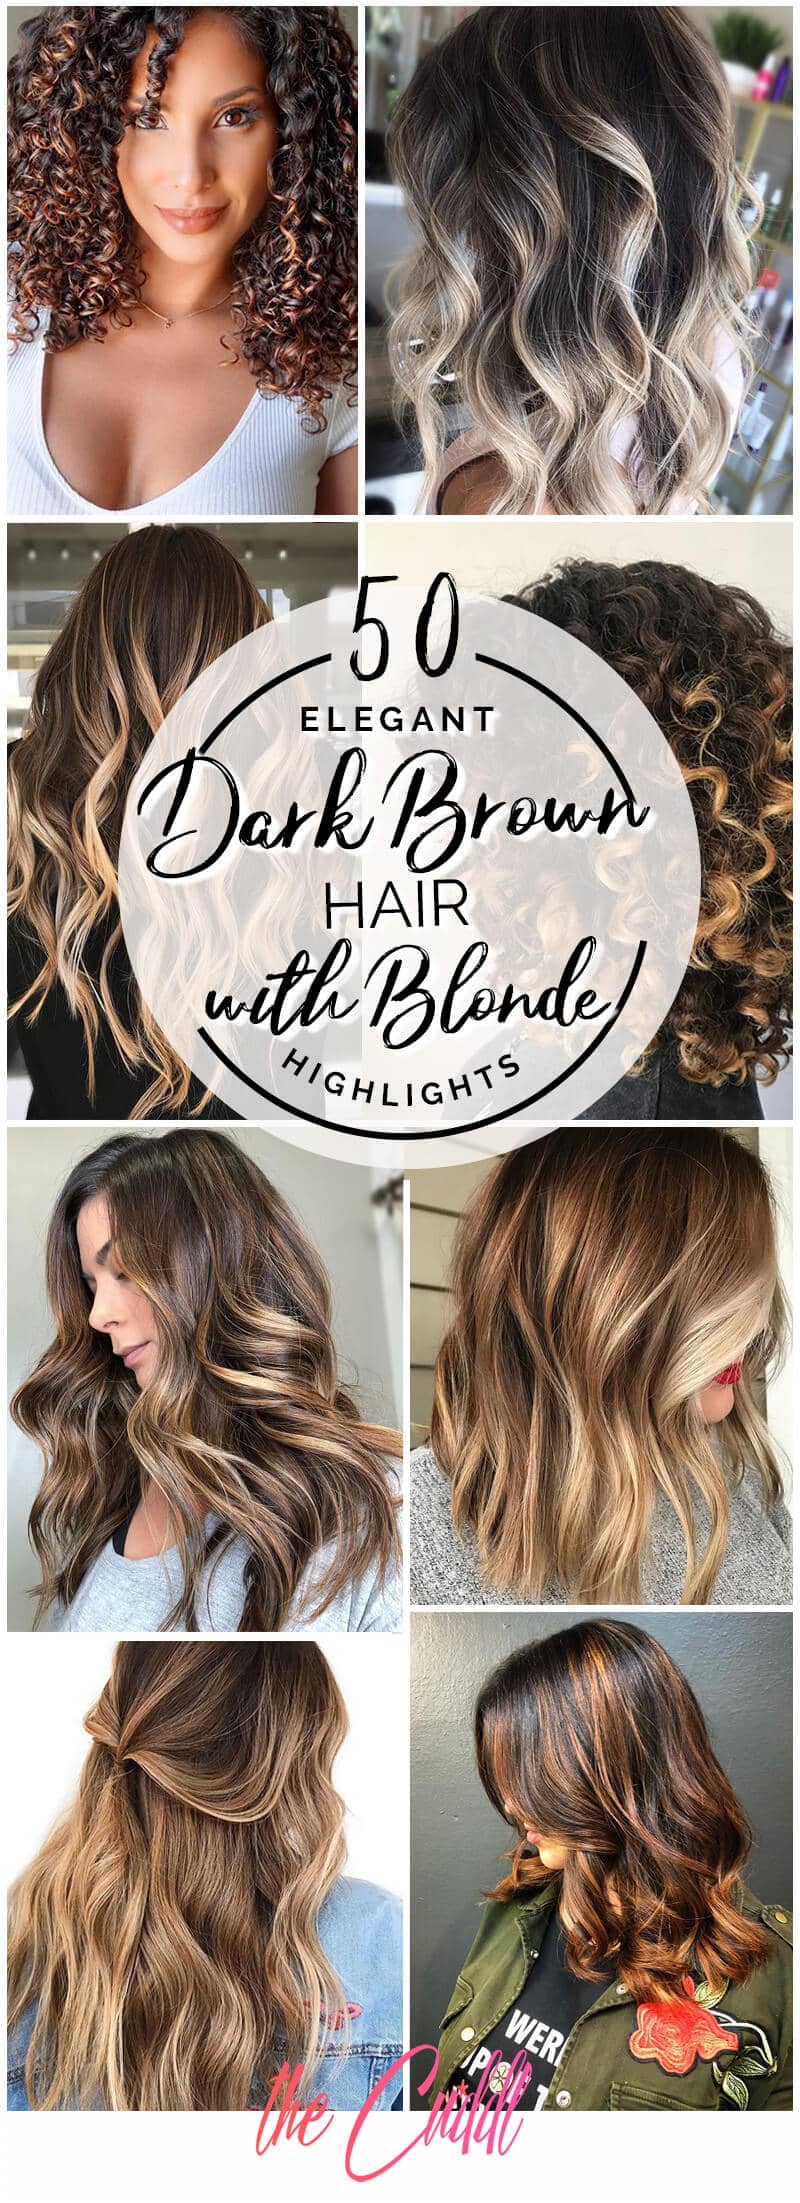 50 Flattering Brown Hair with Blonde Highlights to Inspire Your Next Hairstyle